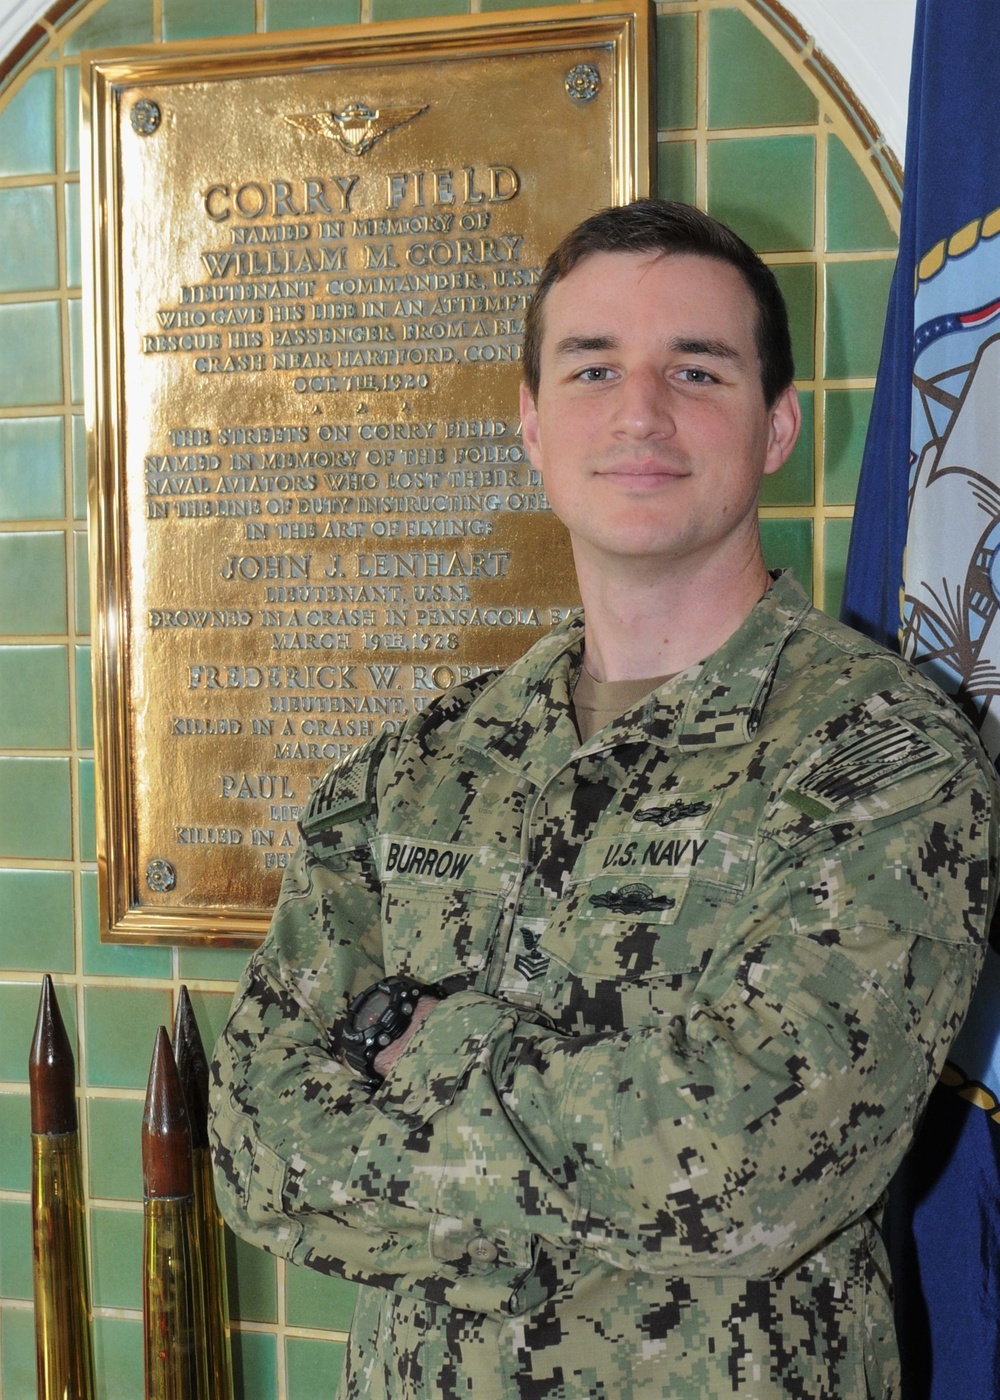 CIWT Sailor Trains, Prepares Navy ISs to Defend America